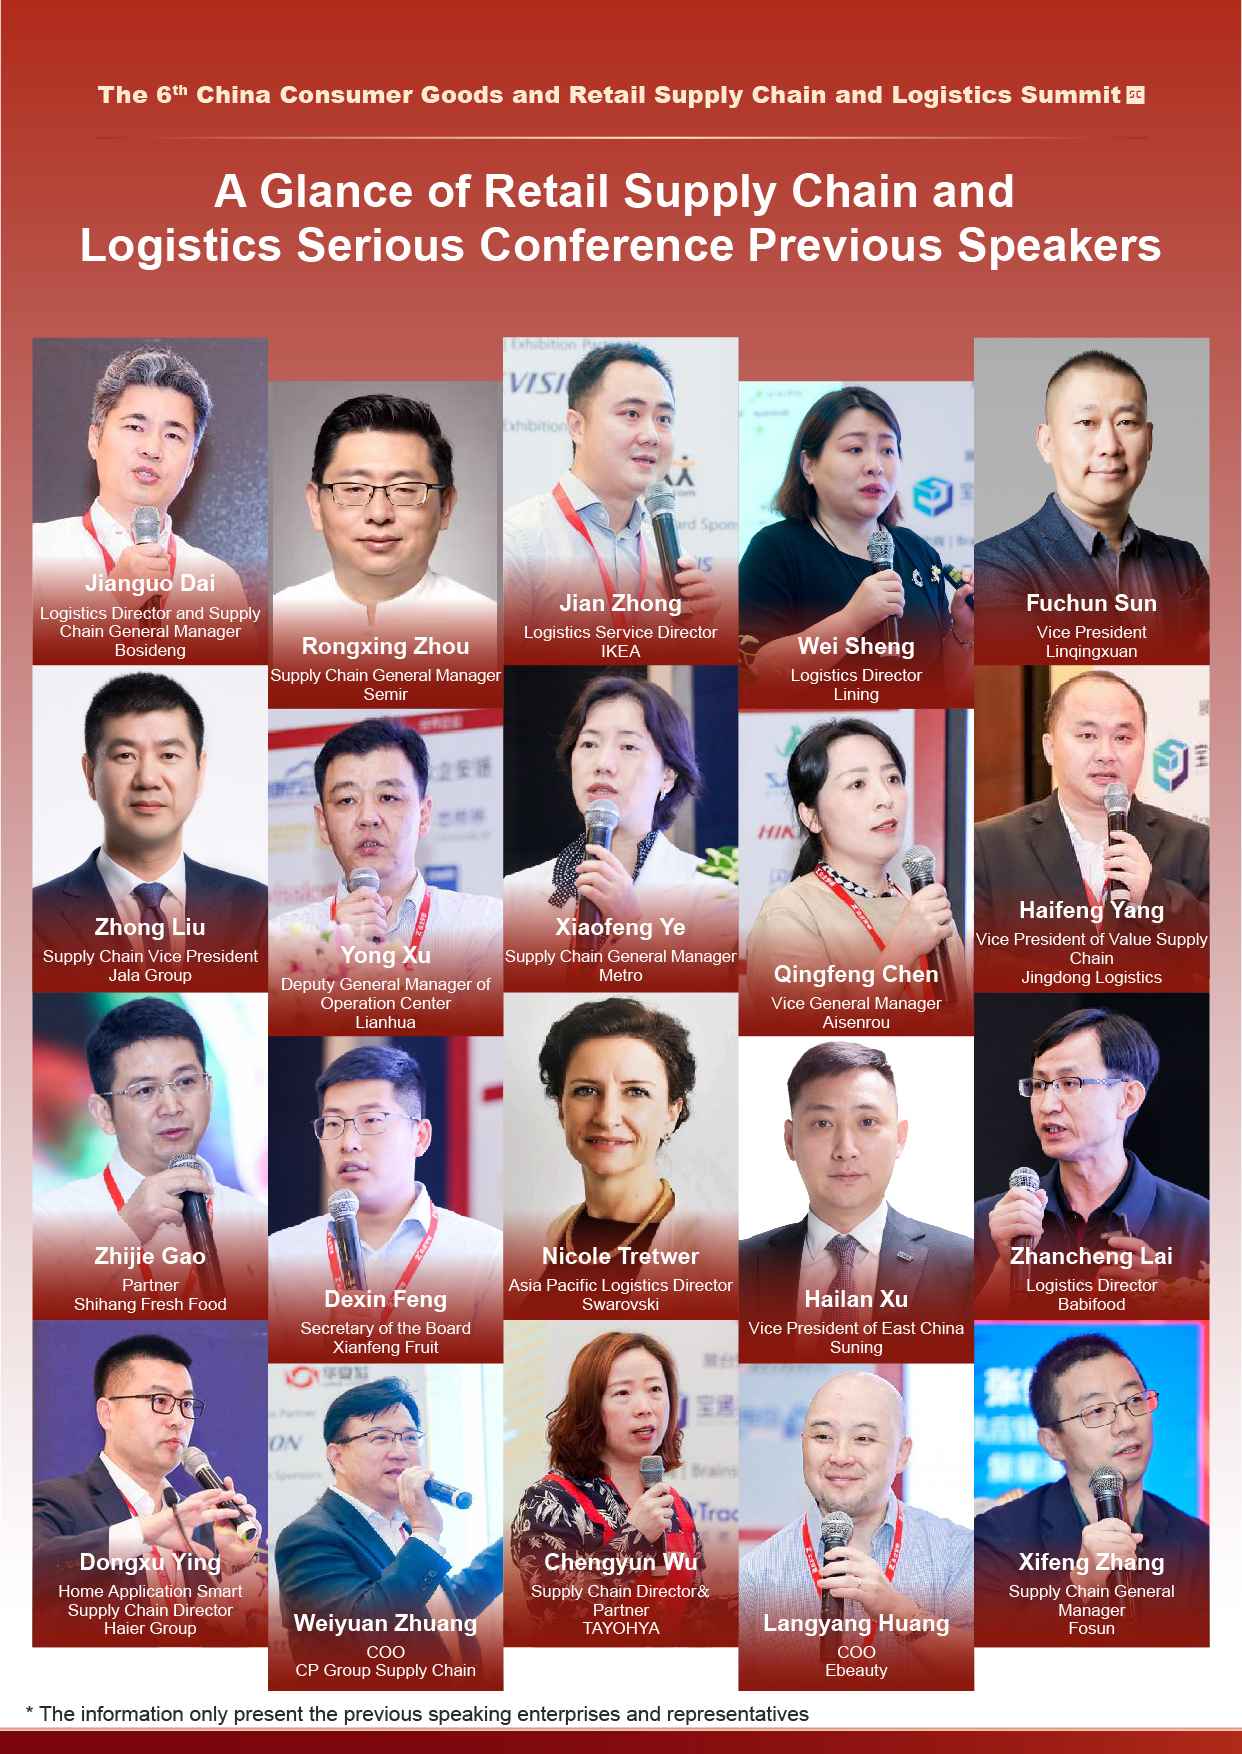 The 6th China Consumer Goods and Retail Supply Chain and Logistics Summit